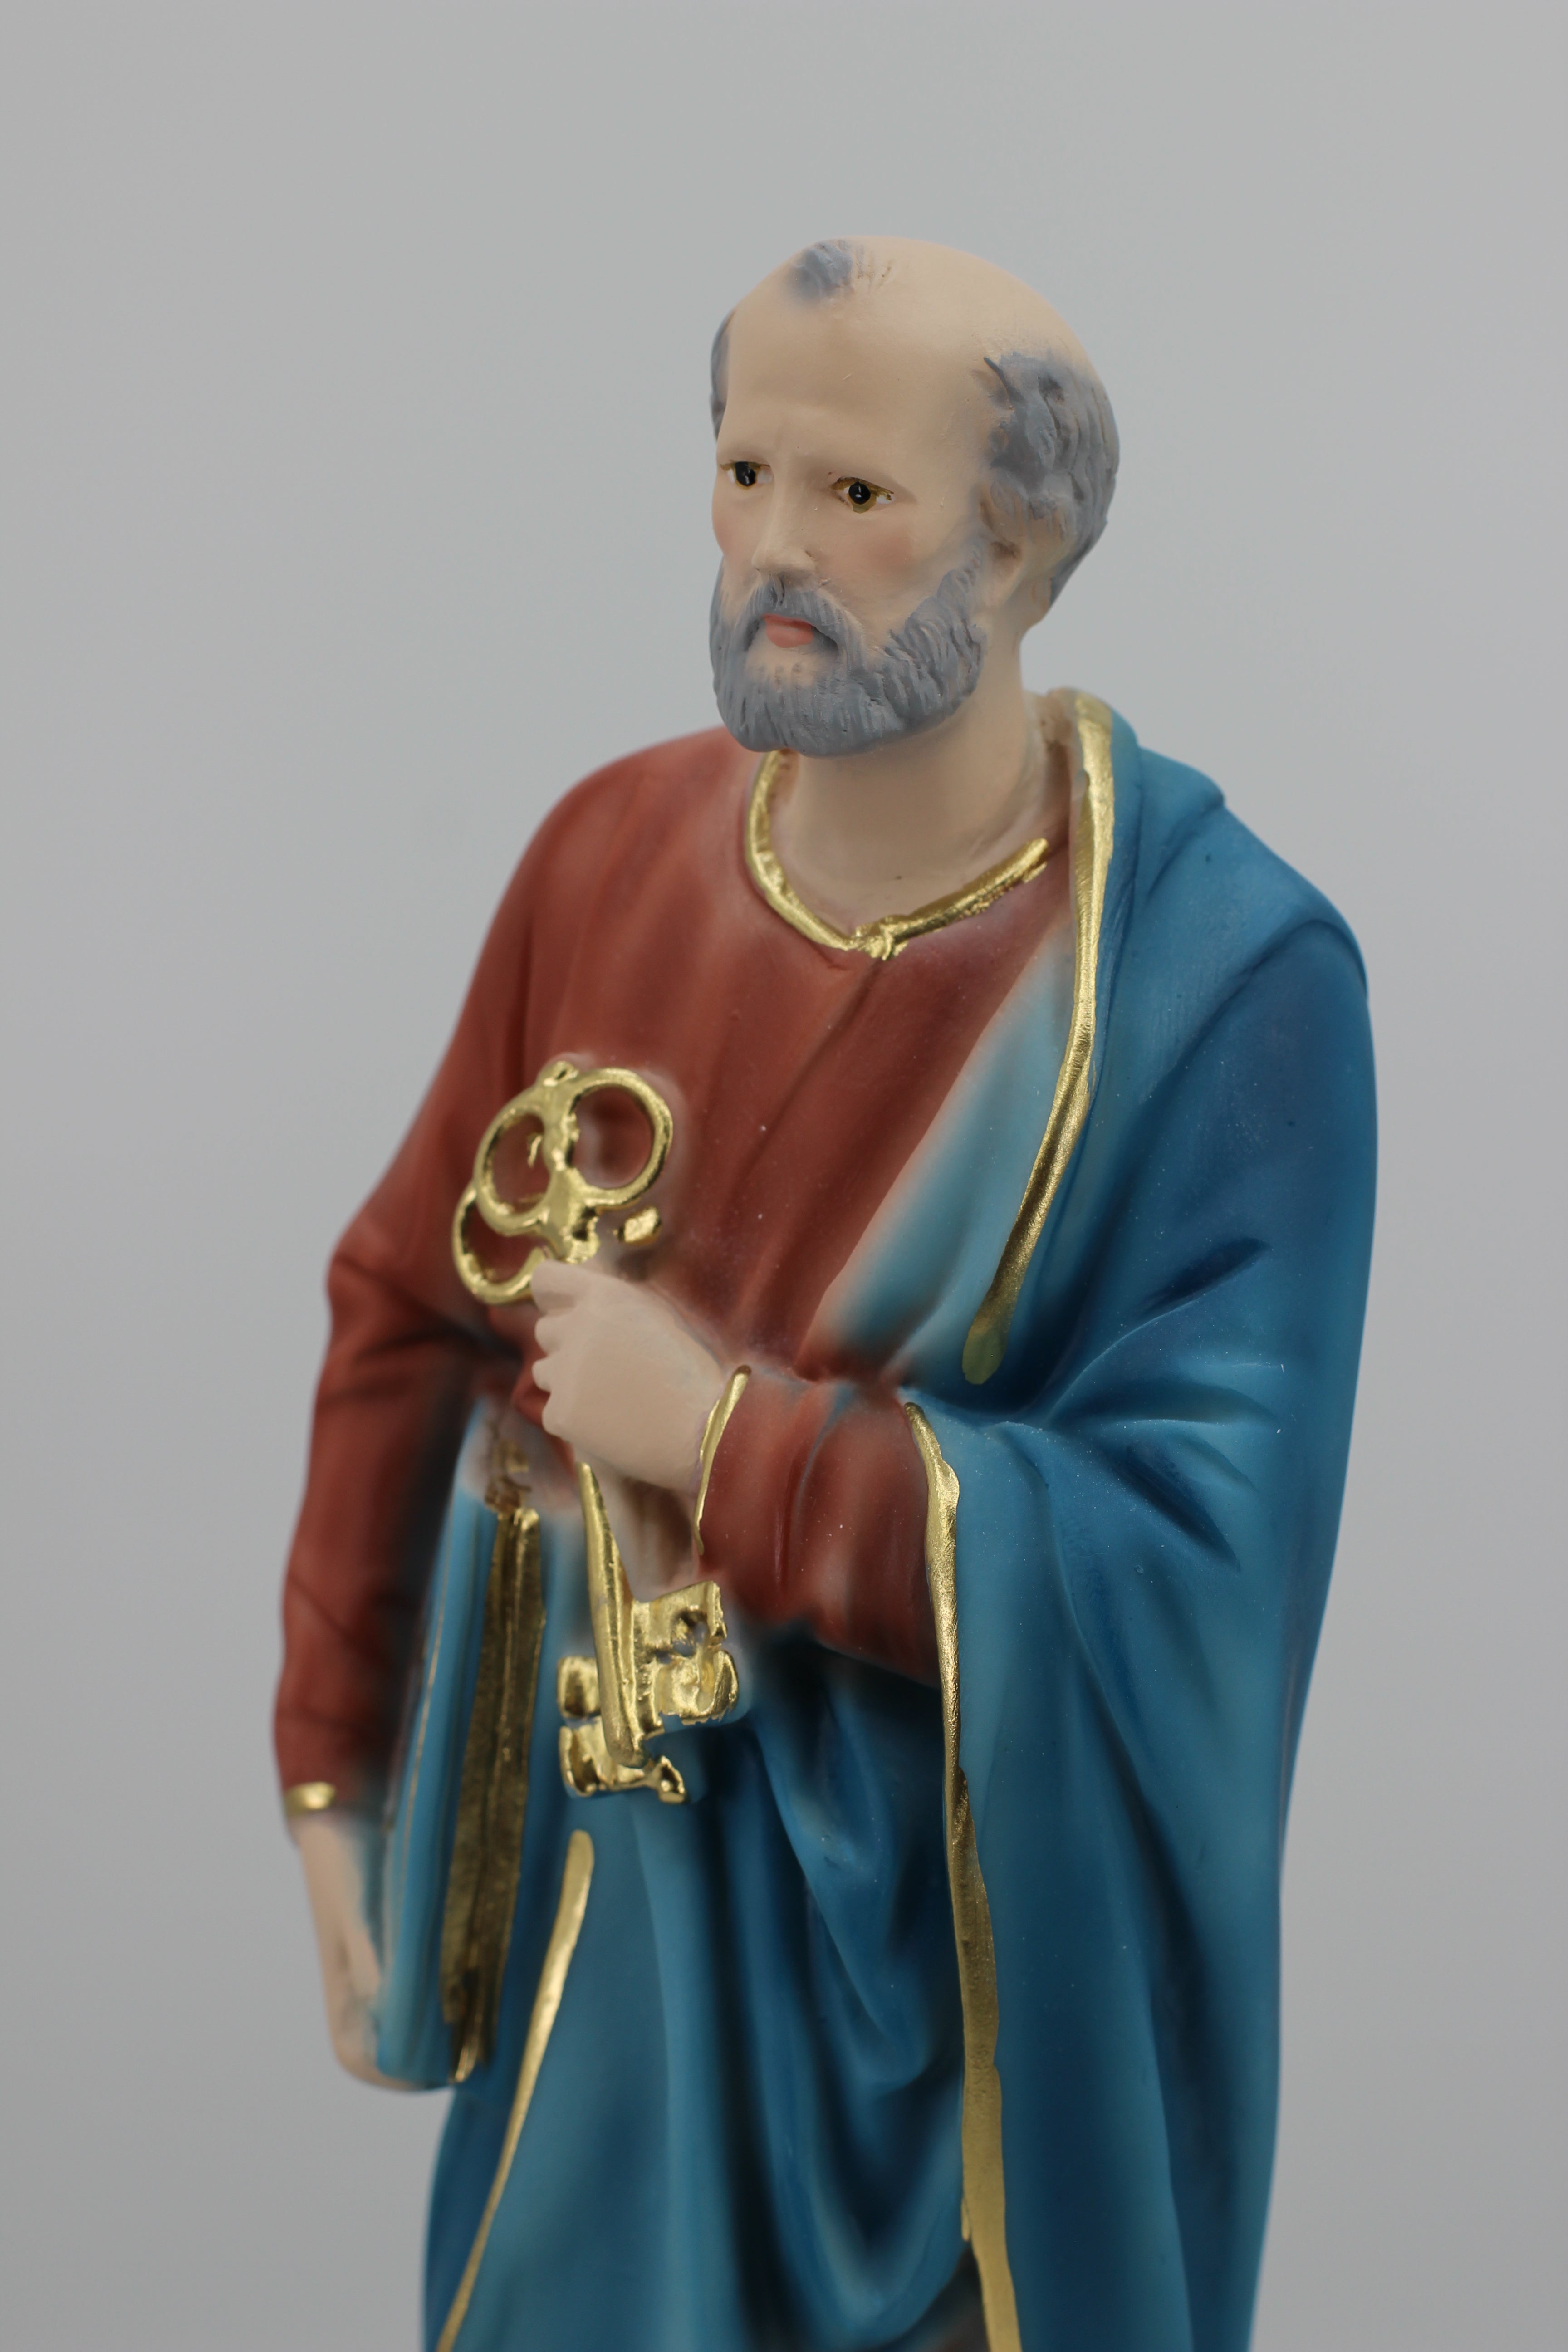 The Faith Gift  Shop Saint Peter  statue - Hand Painted in Italy - Our Tuscany Collection -Estatua de San Pedro